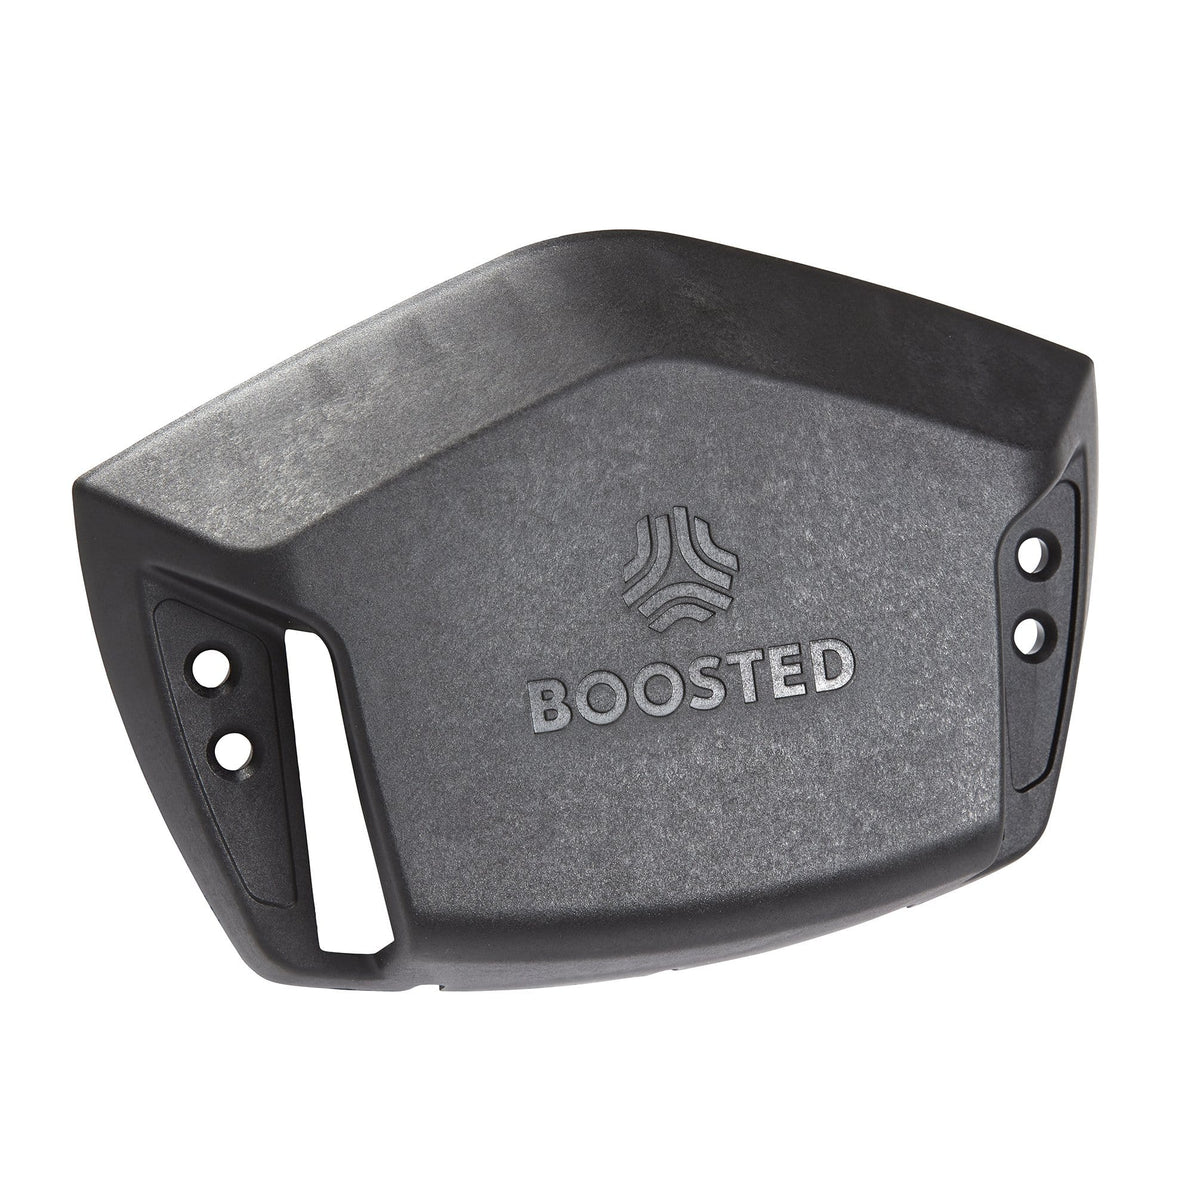 Boosted Motor Driver Covers